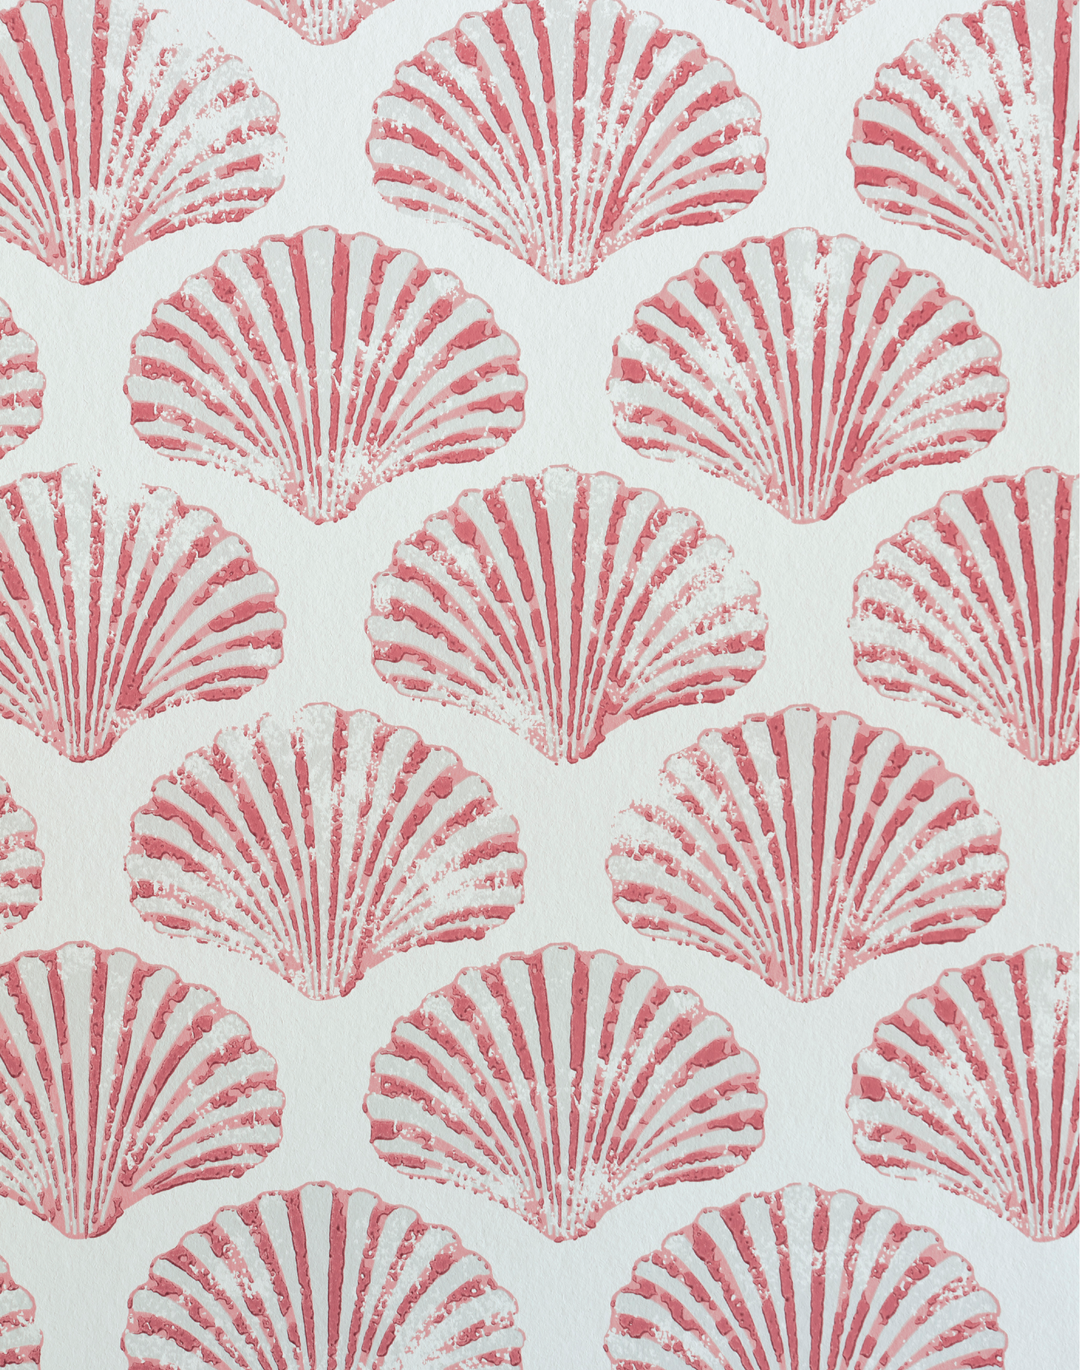 Scallop Shell, Red